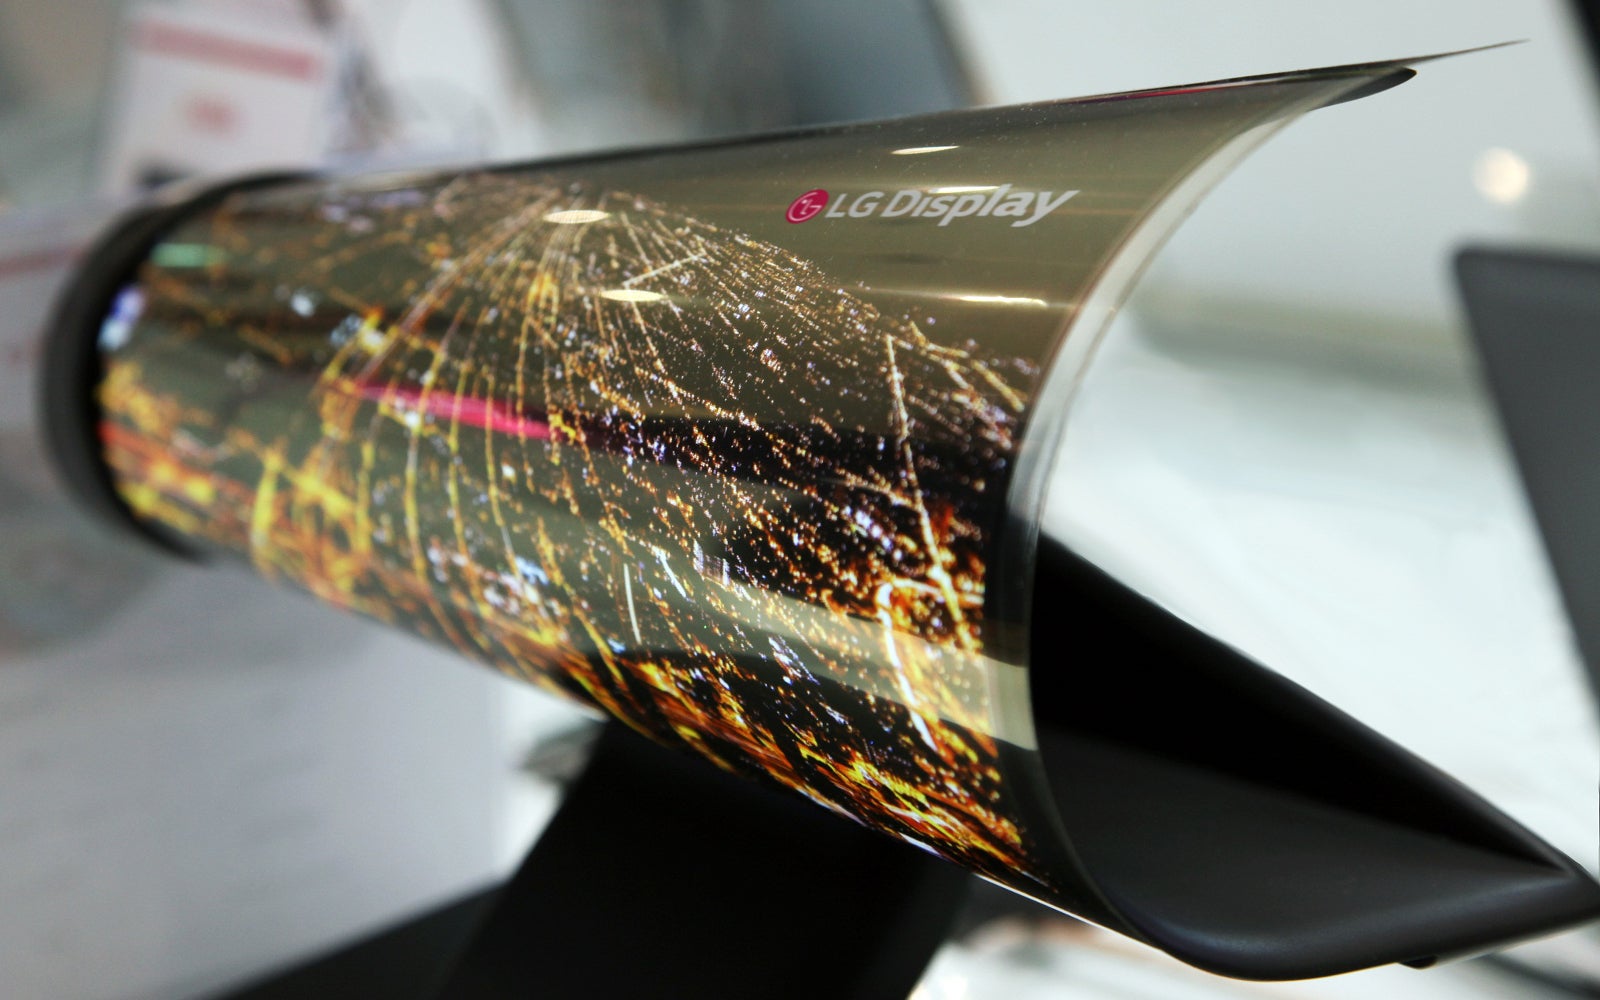 LG is going to showcase this rollable display prototype at CES &#039;16, but will it let us touch is? - This LG rollable display prototype gives us a taste of things to come